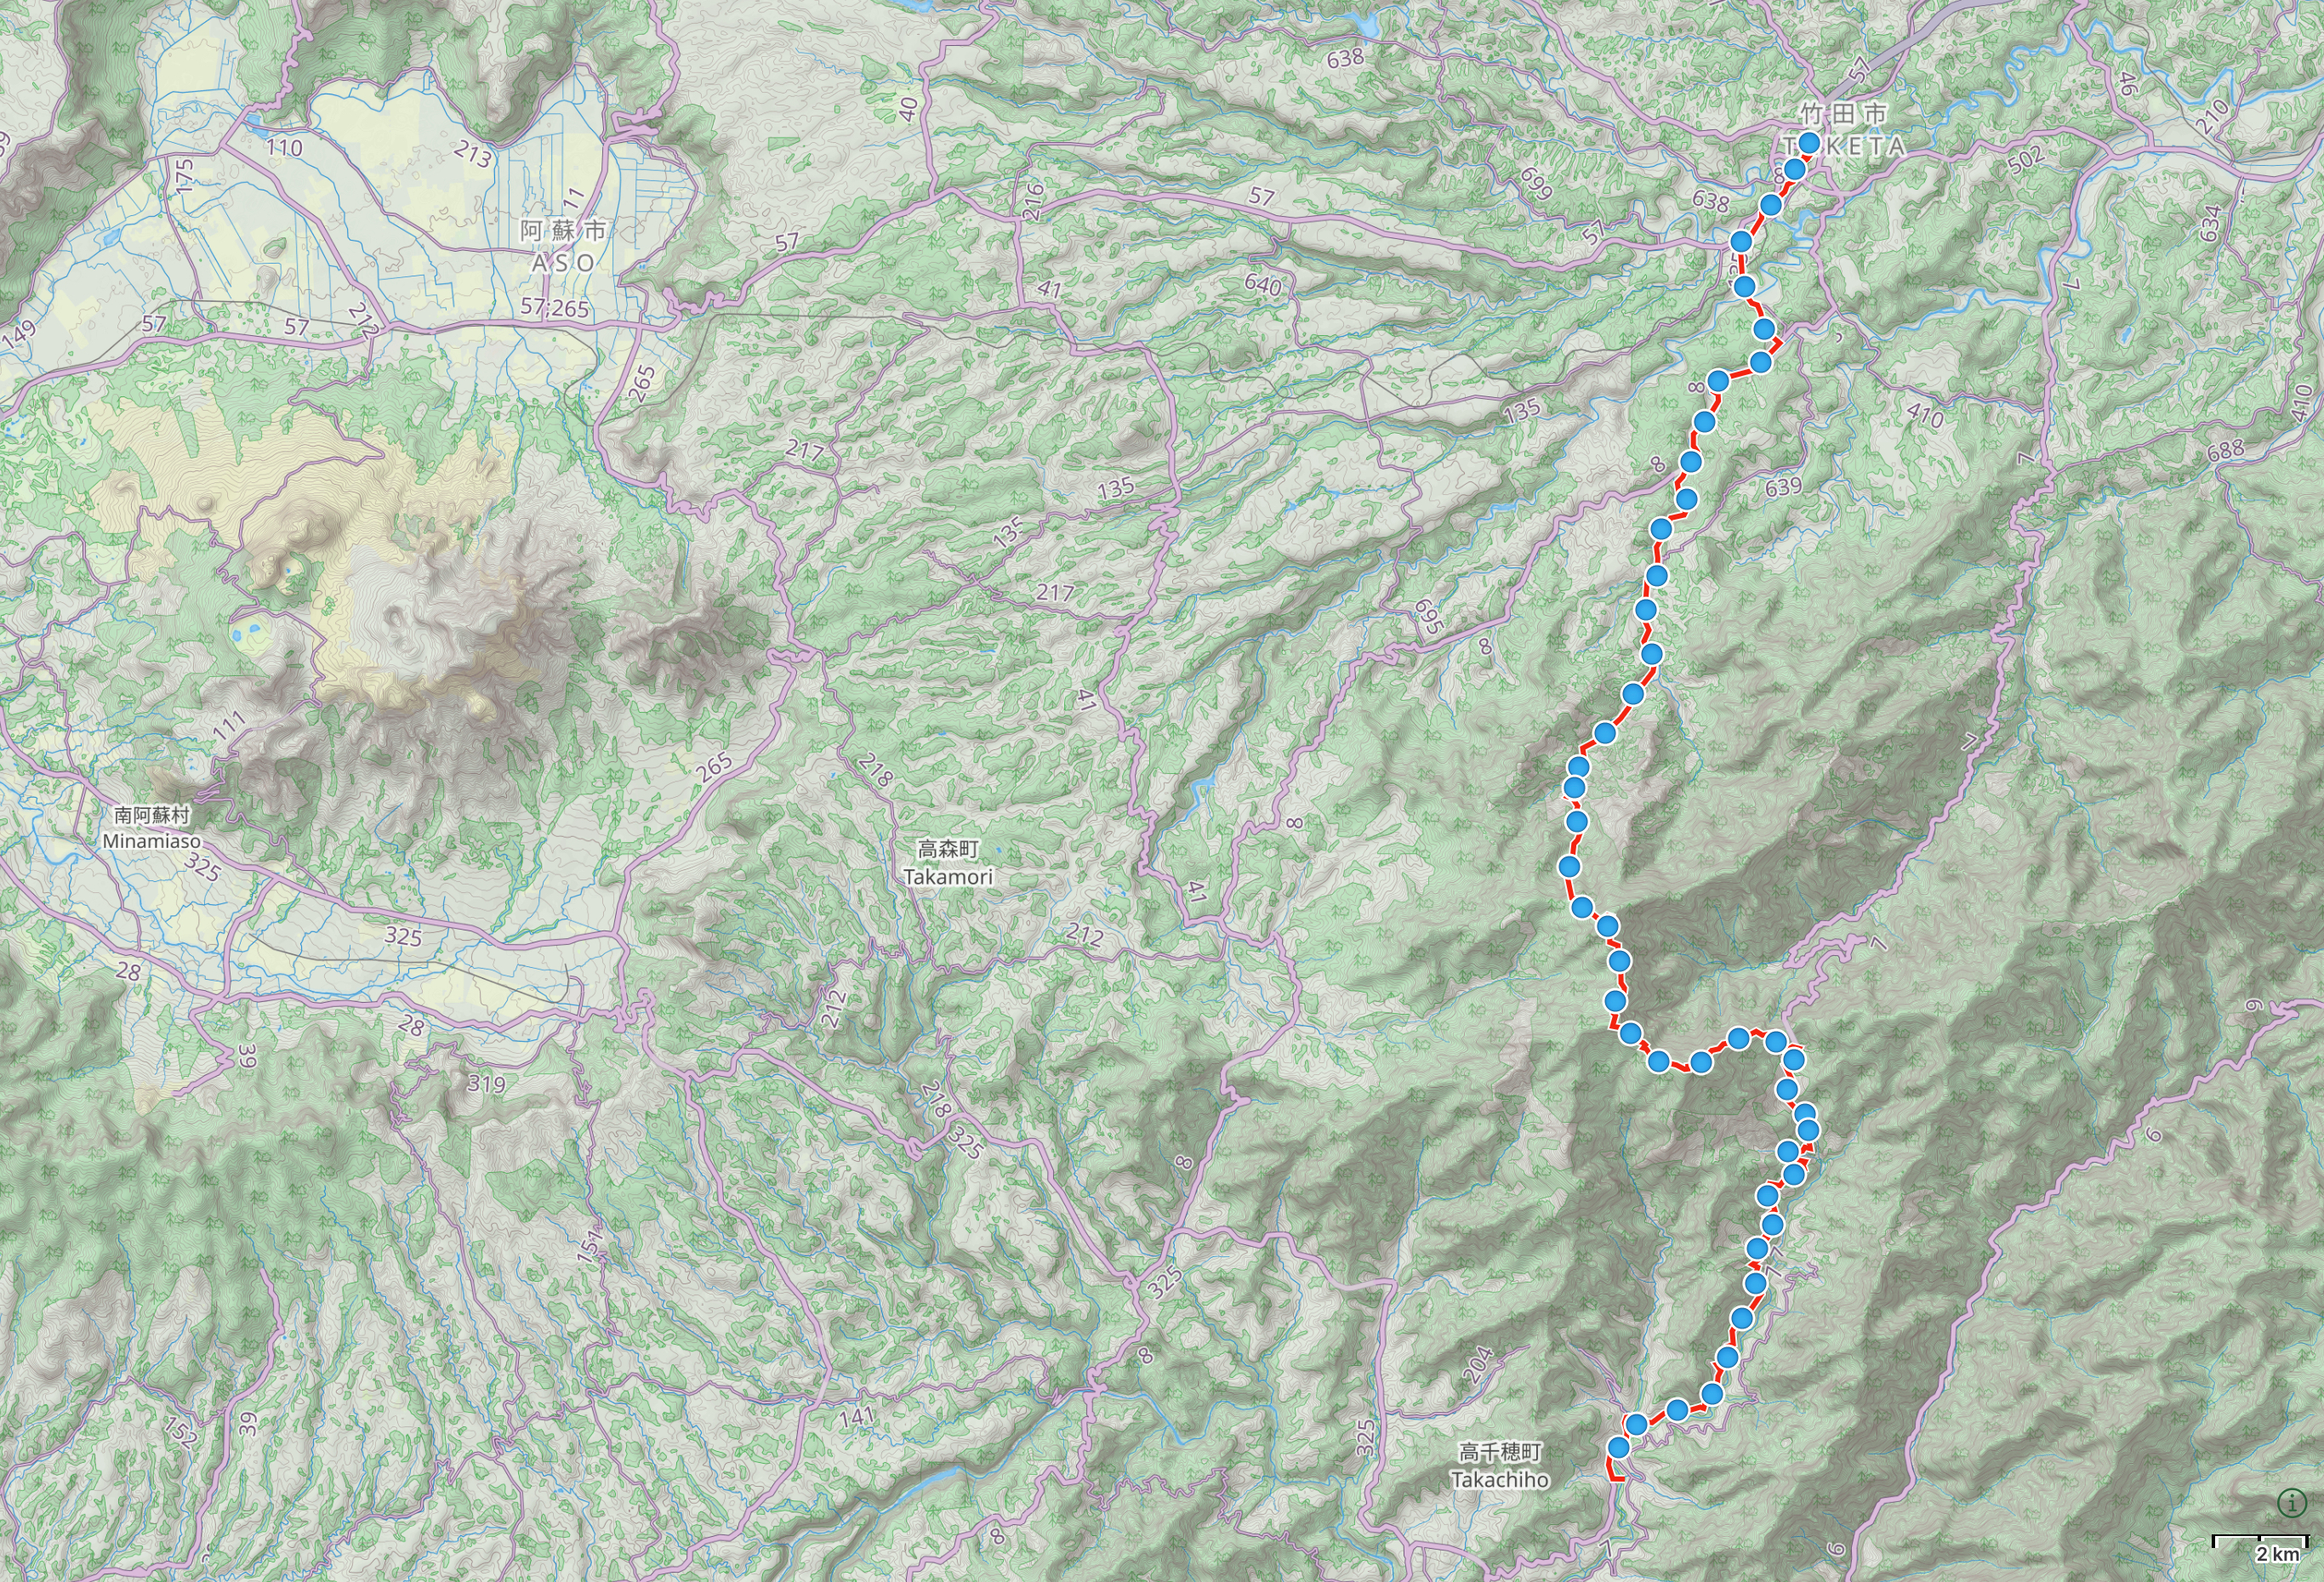 Map of Northeast Kyushu with author’s route across Mount Sobo highlighted.